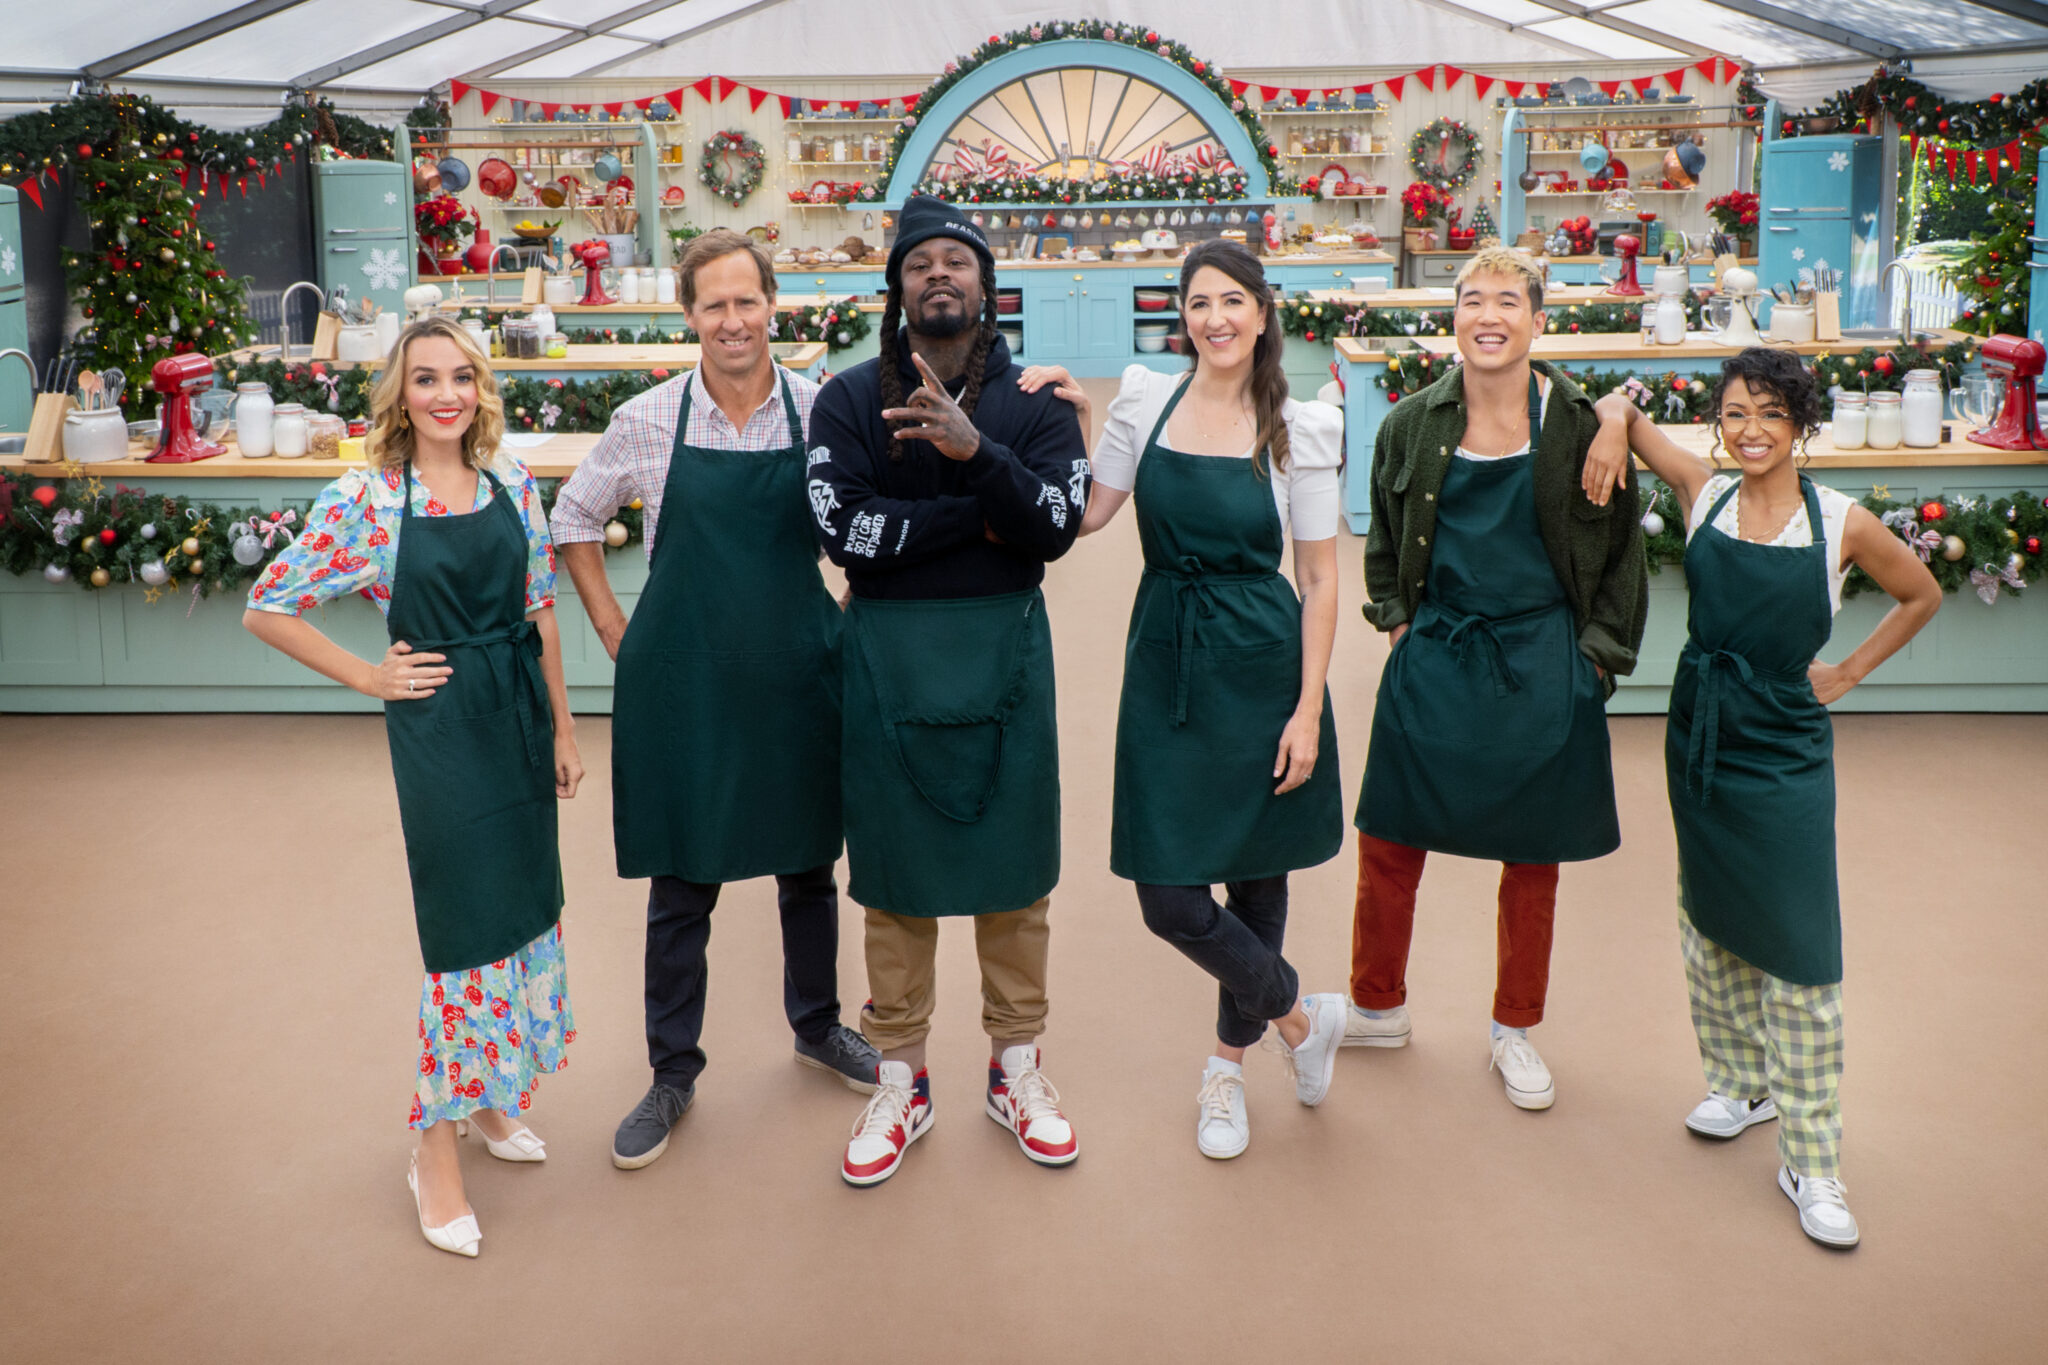 Roku announces details of 'The Great American Baking Show' CULTURE MIX